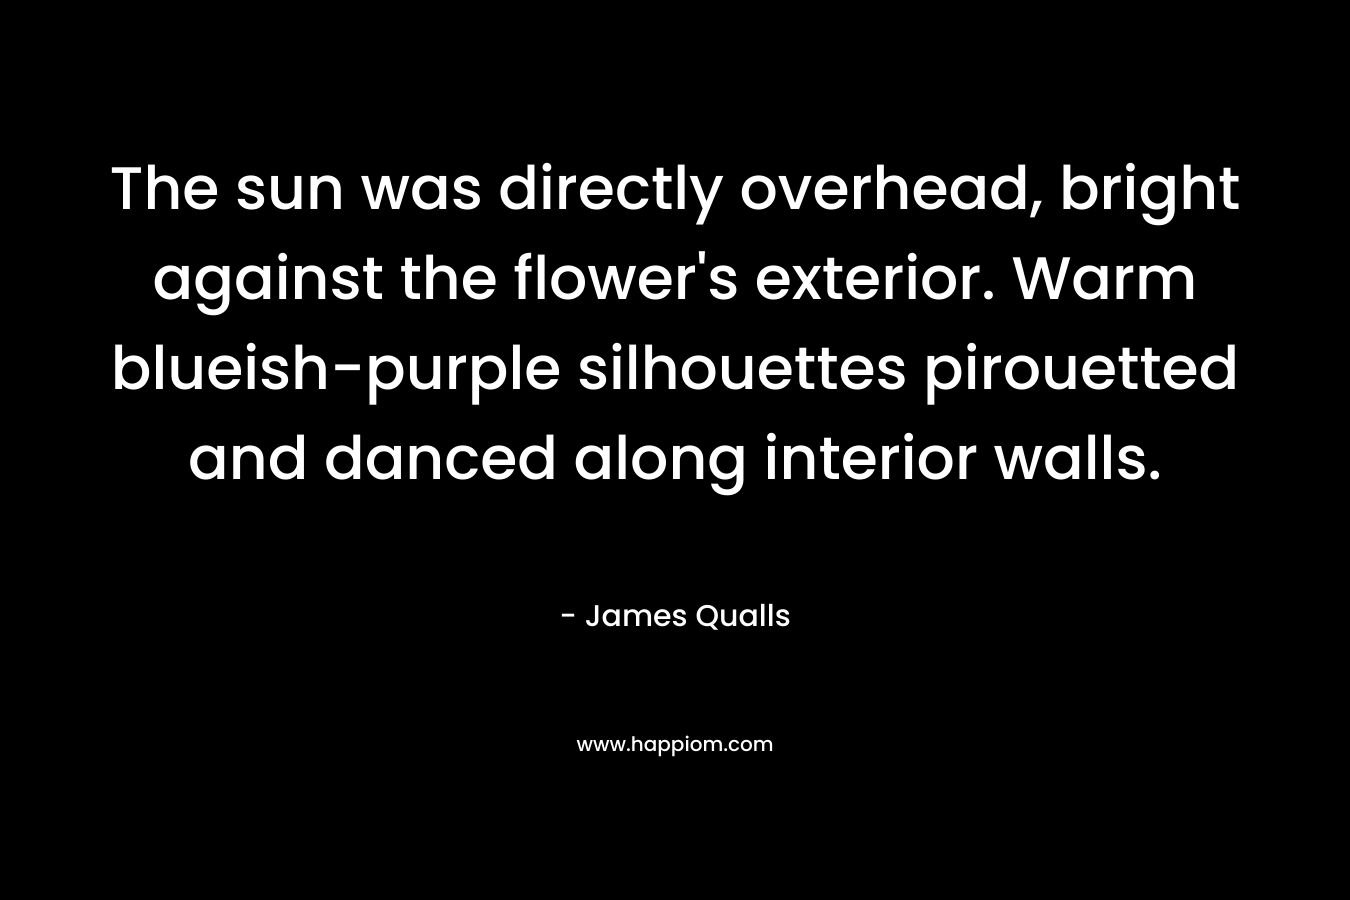 The sun was directly overhead, bright against the flower’s exterior. Warm blueish-purple silhouettes pirouetted and danced along interior walls. – James Qualls